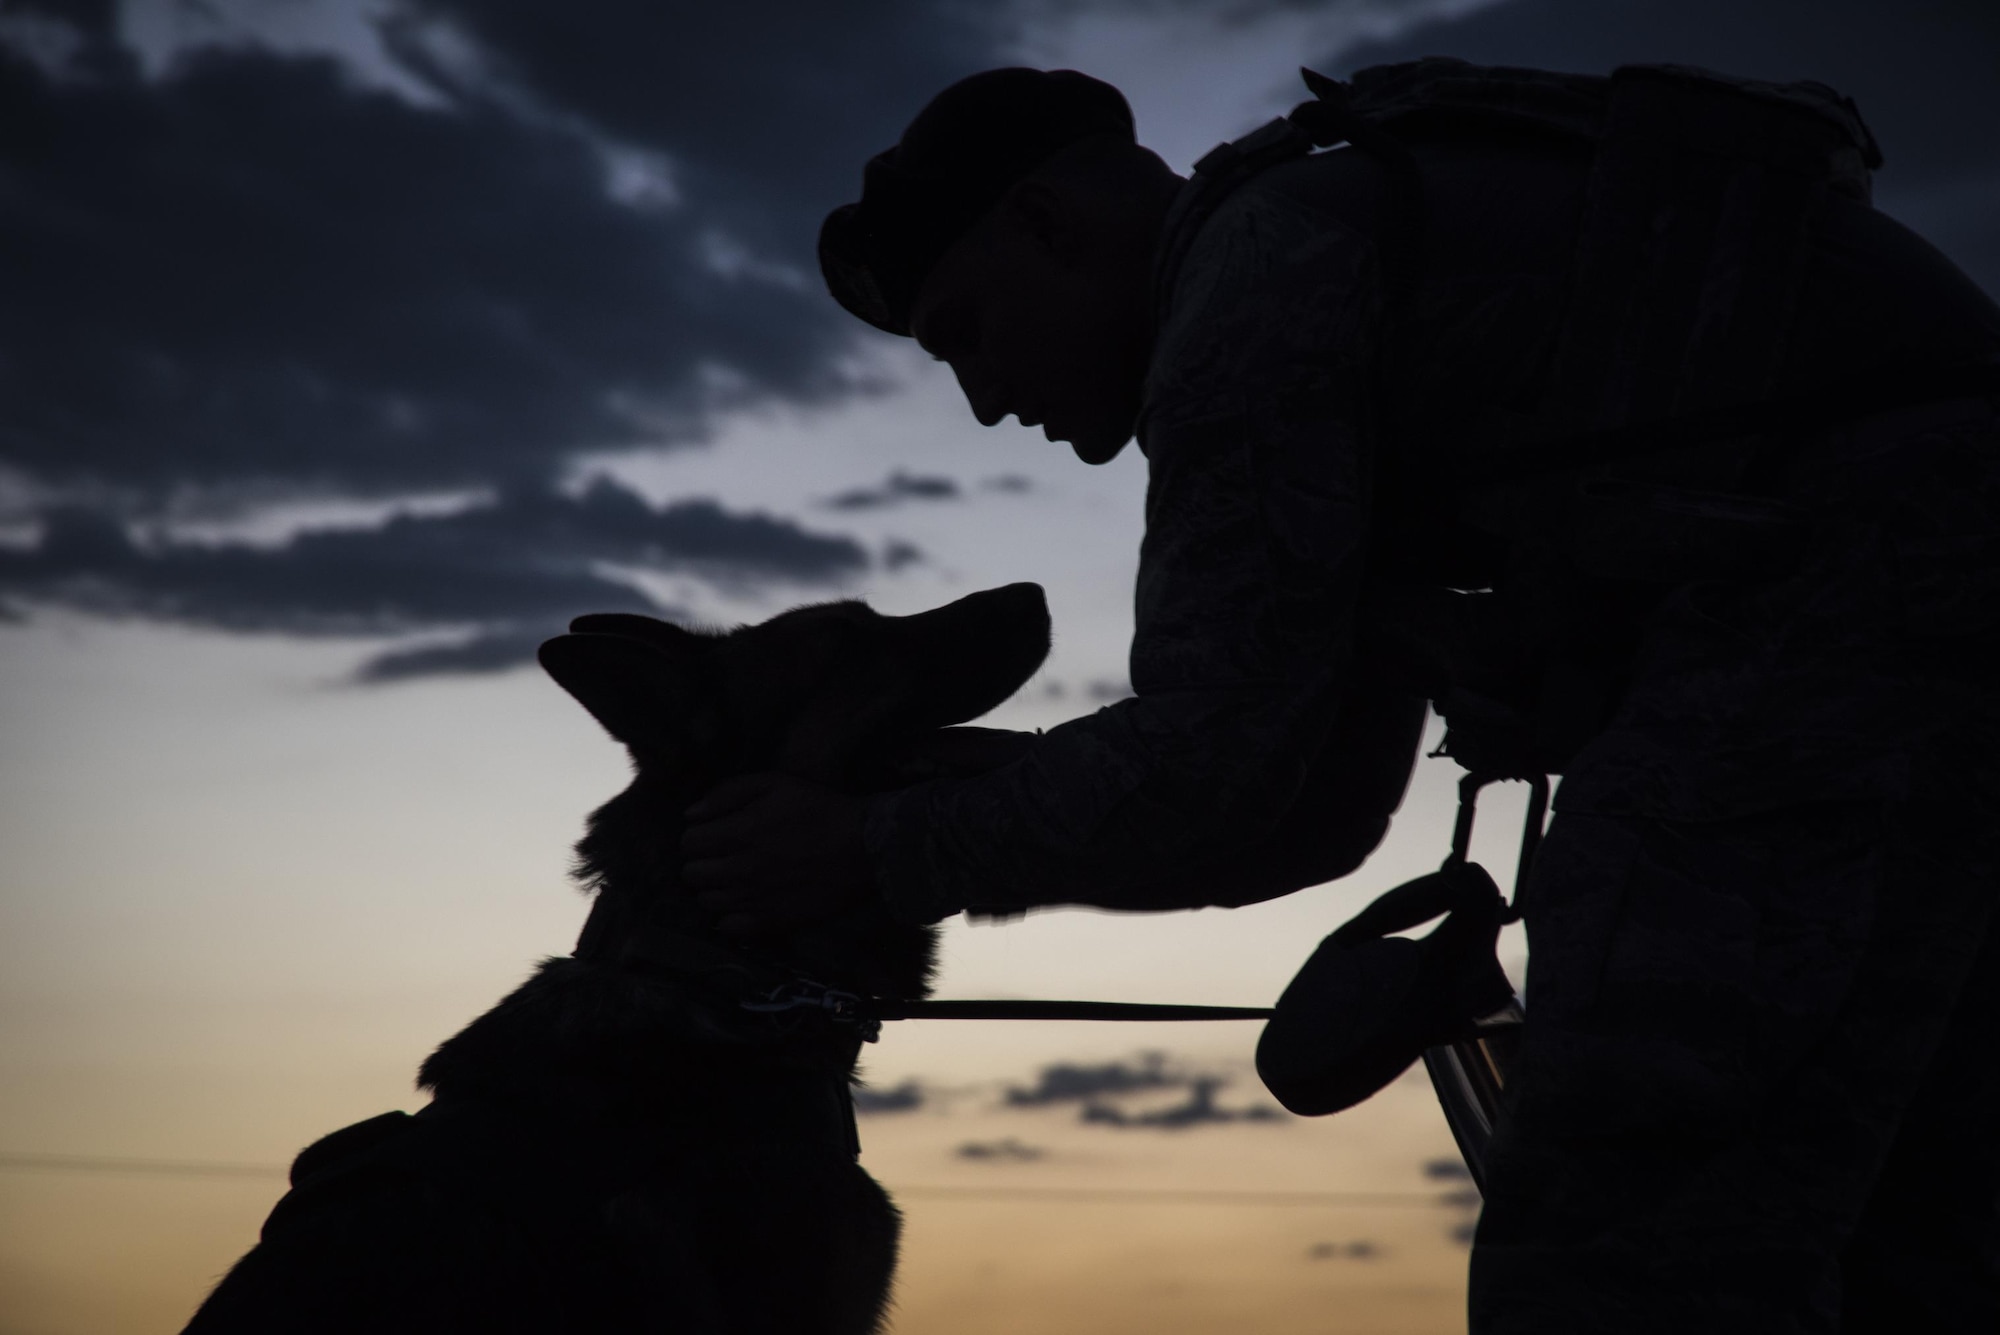 Senior Airman Ryne Wilson, 99th Security Forces Squadron military working dog handler, praises MWD Habo during a patrol at Nellis Air Force Base, Nevada, August 7, 2017. Praising their dog for exhibiting good behavior is an exceptional way to help build a bond between the handler and their dog. (U.S. Air Force photo by Airman 1st Class Andrew D. Sarver/Released)